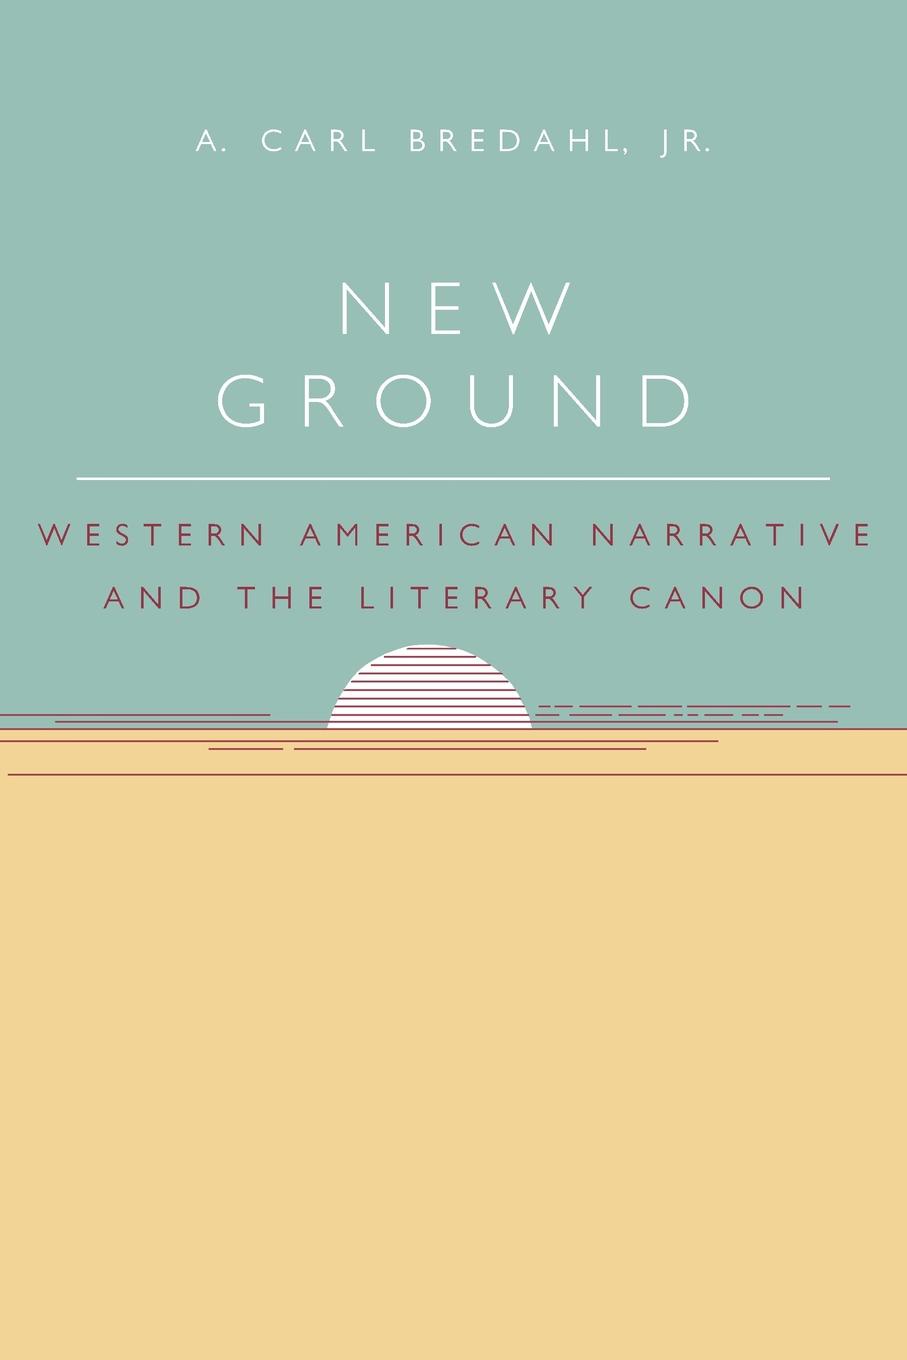 New Ground. Western American Narrative and the Literary Canon